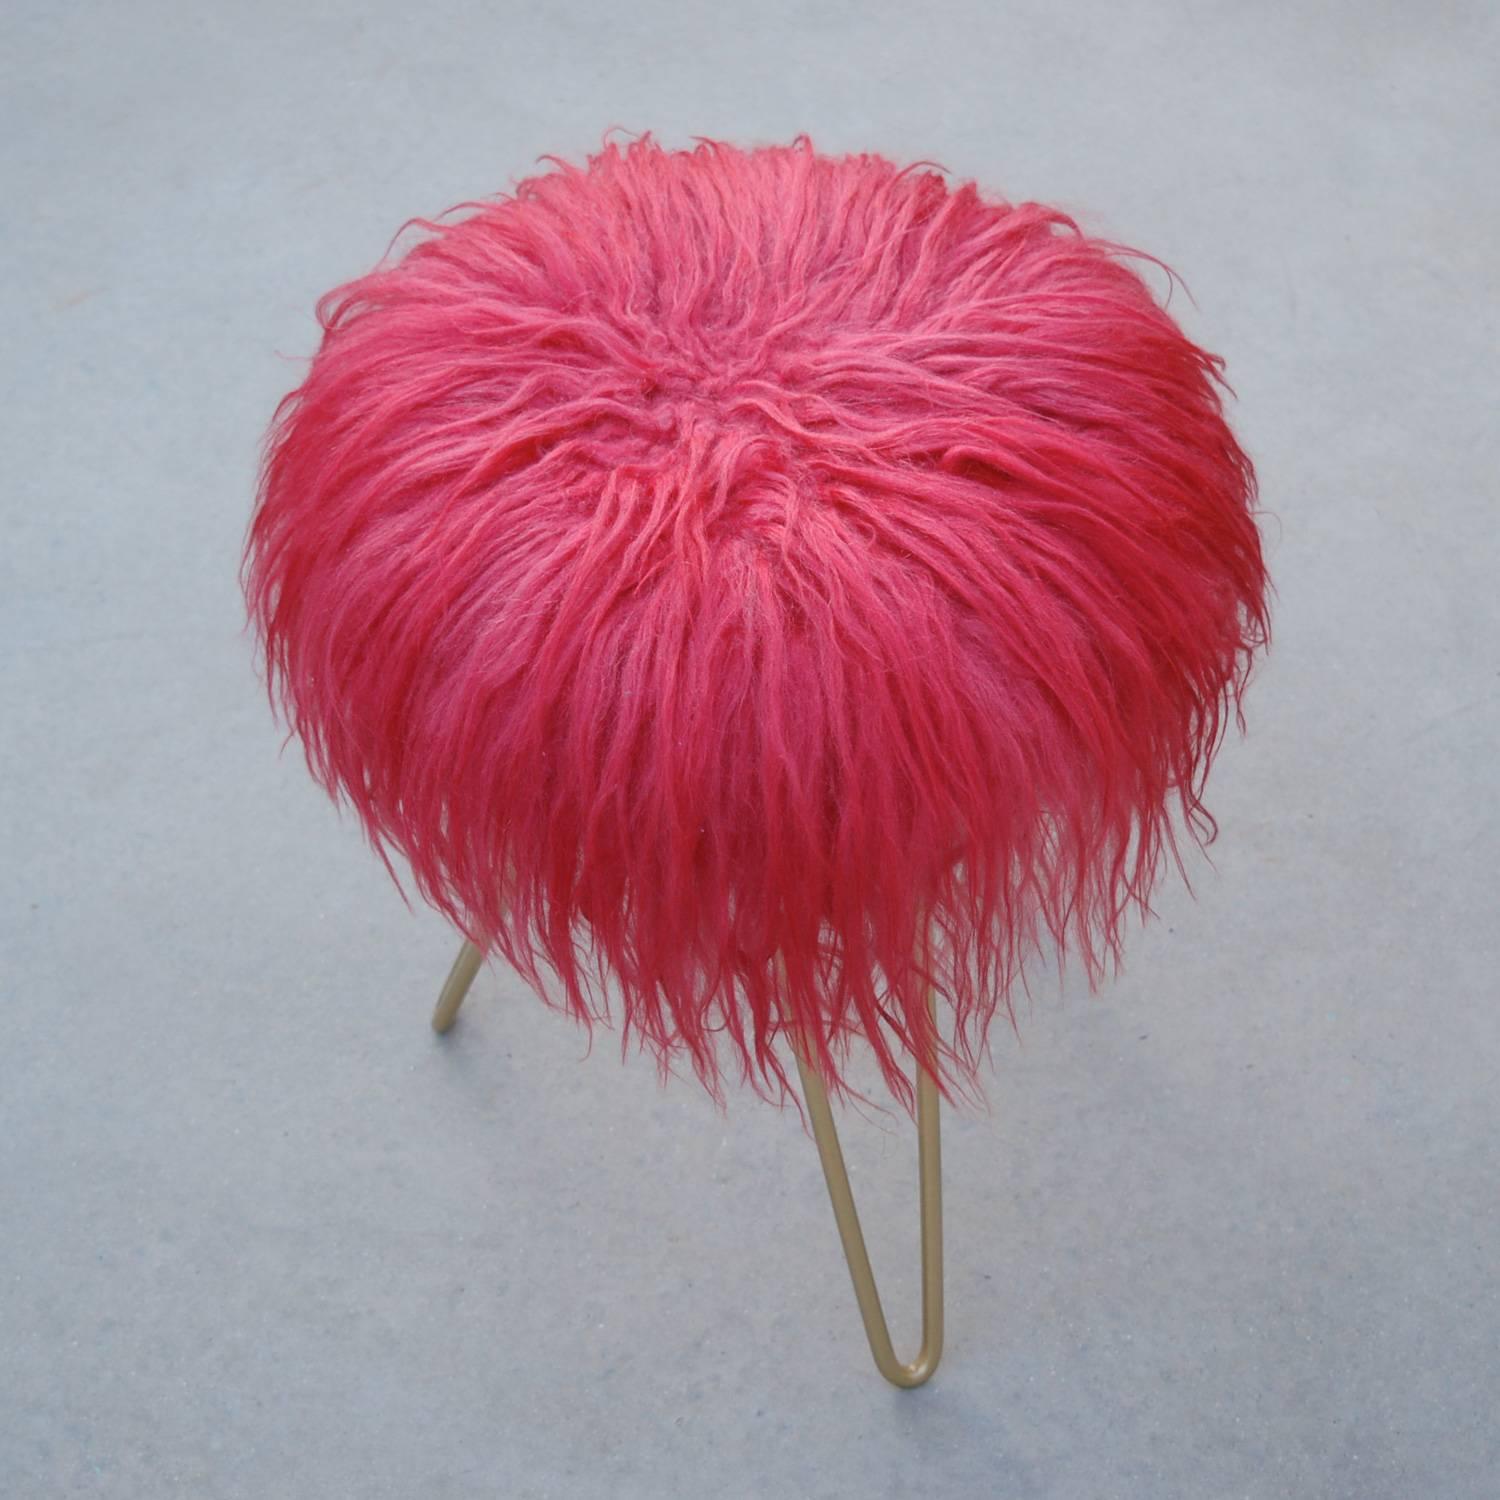 Vintage fur tripod stool with gold colored hairpin legs reminiscent of that 1970s glamour. Seat is covered with long haired lambswool which has been dyed pink and is in good condition (no shedding, no loss).

 